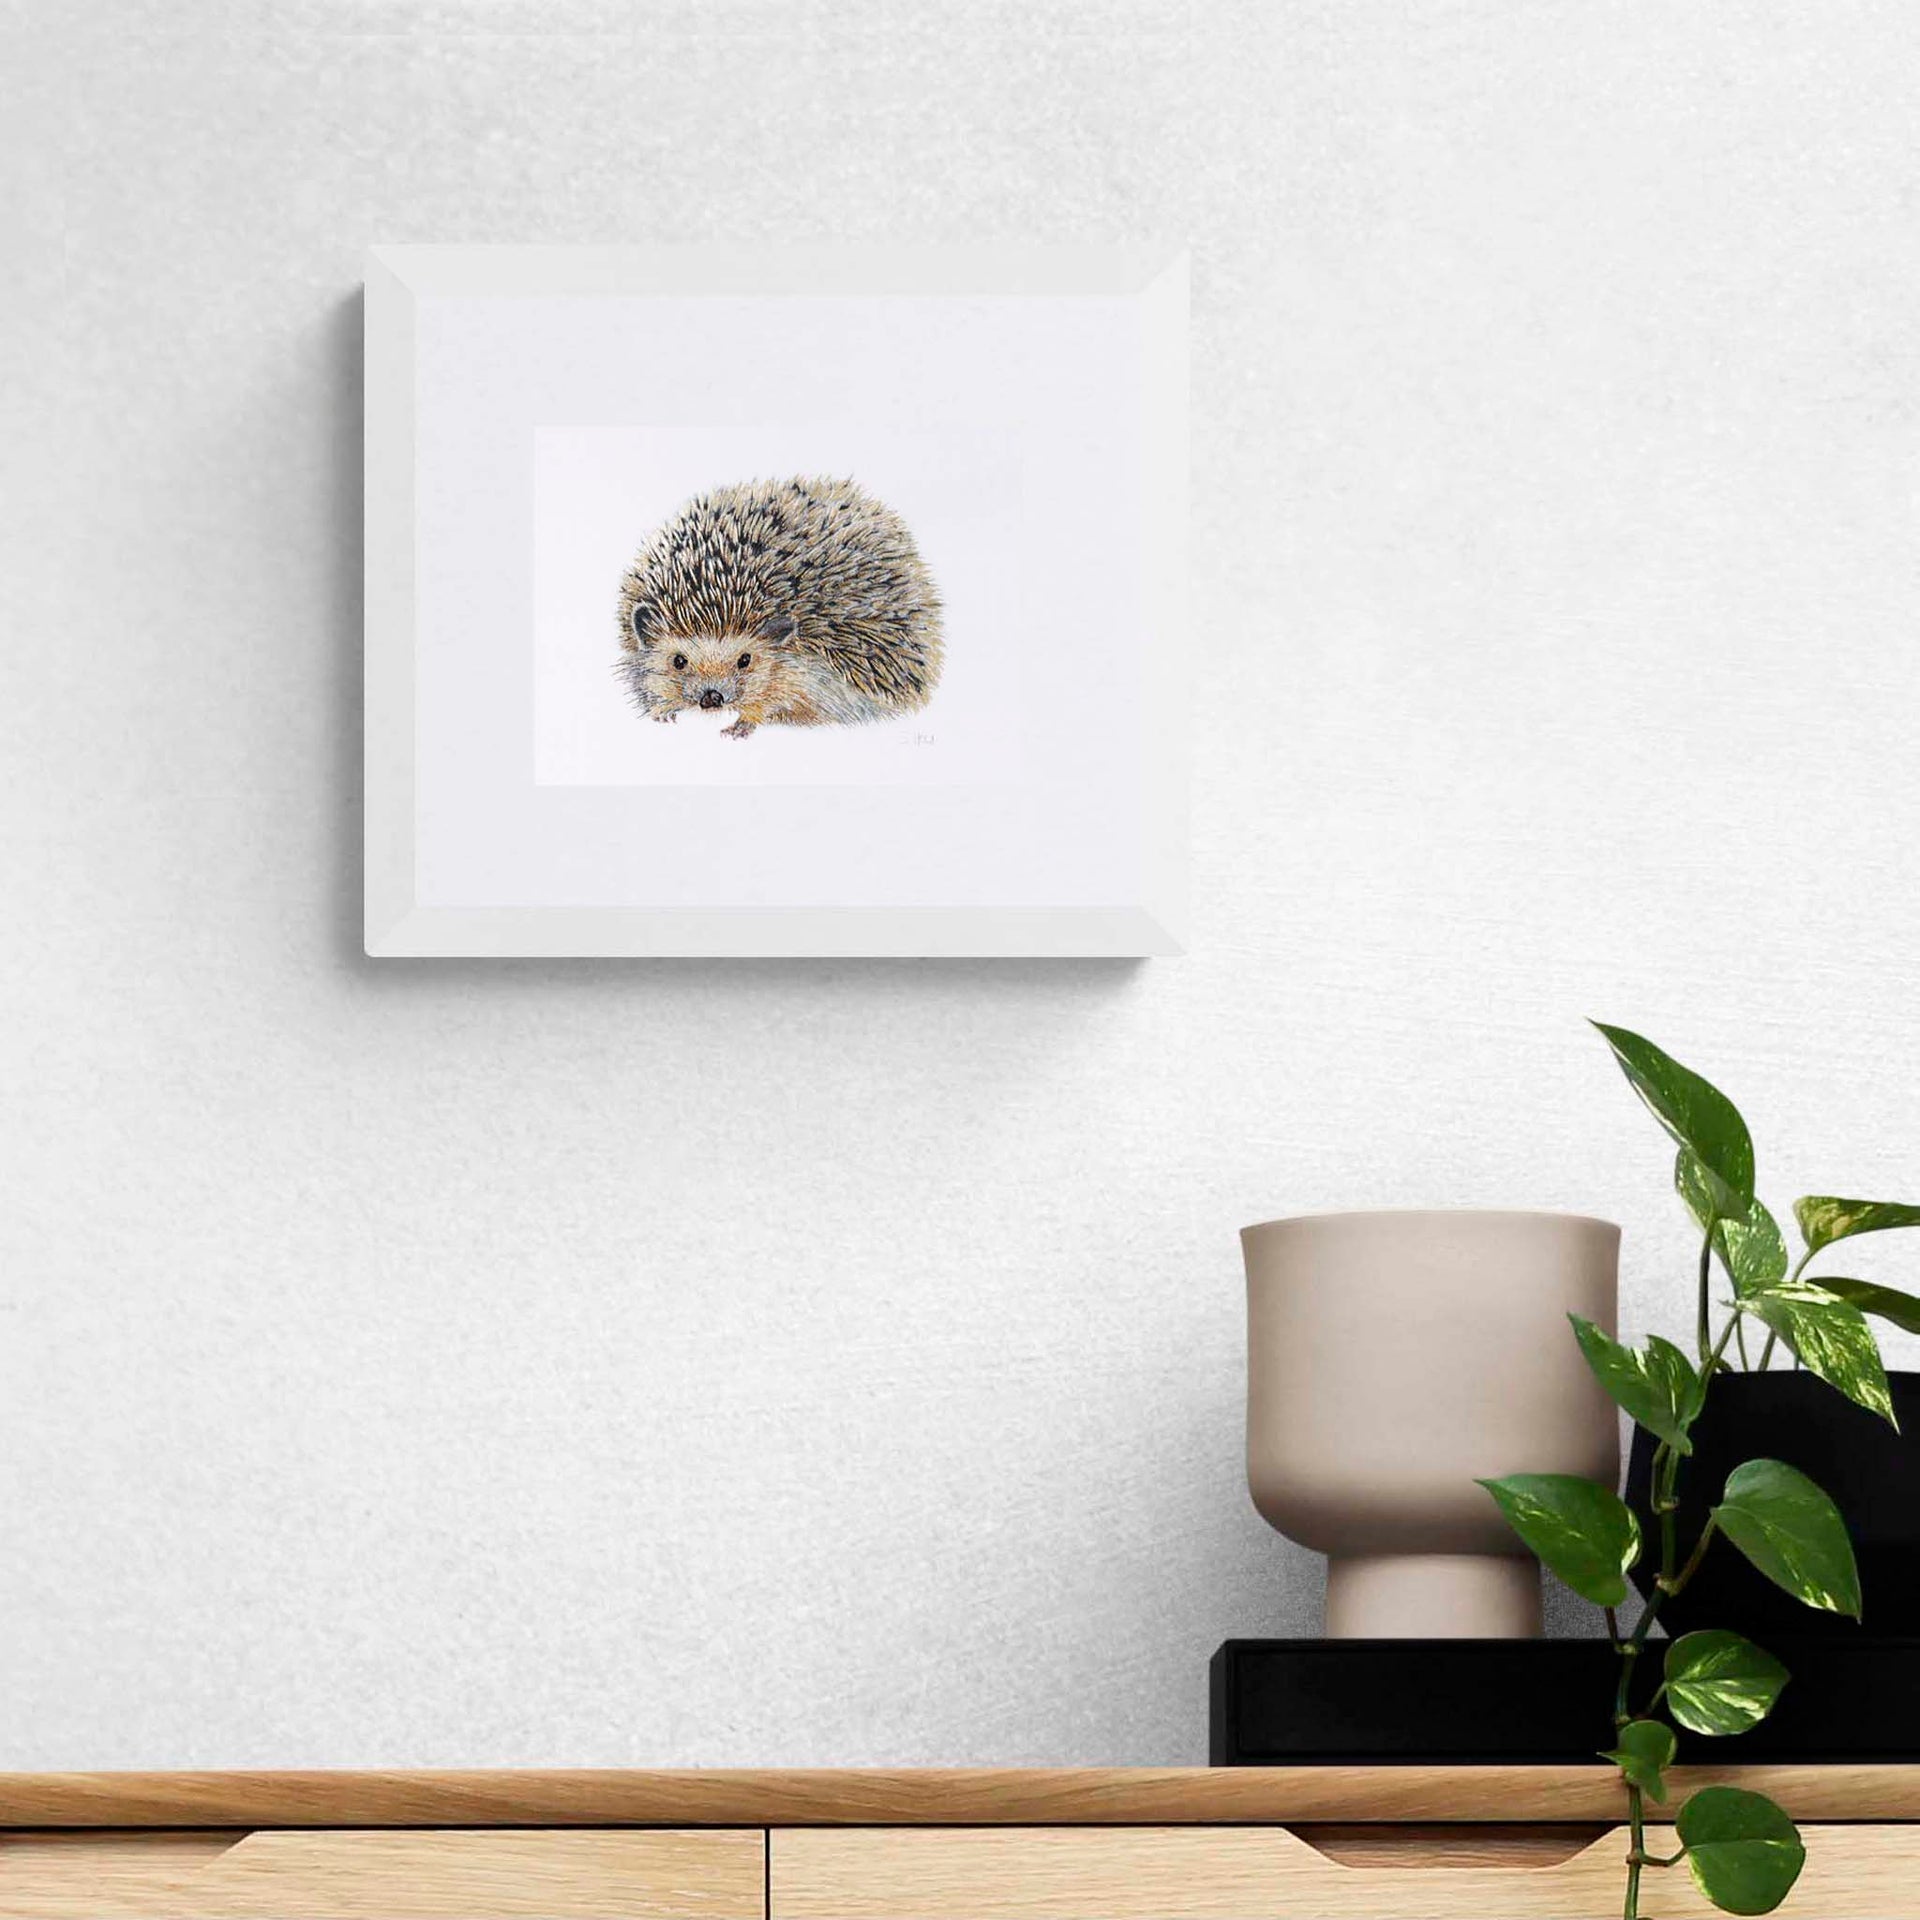 Hand embroidered hedgehog limited edition print in white frame on the wall